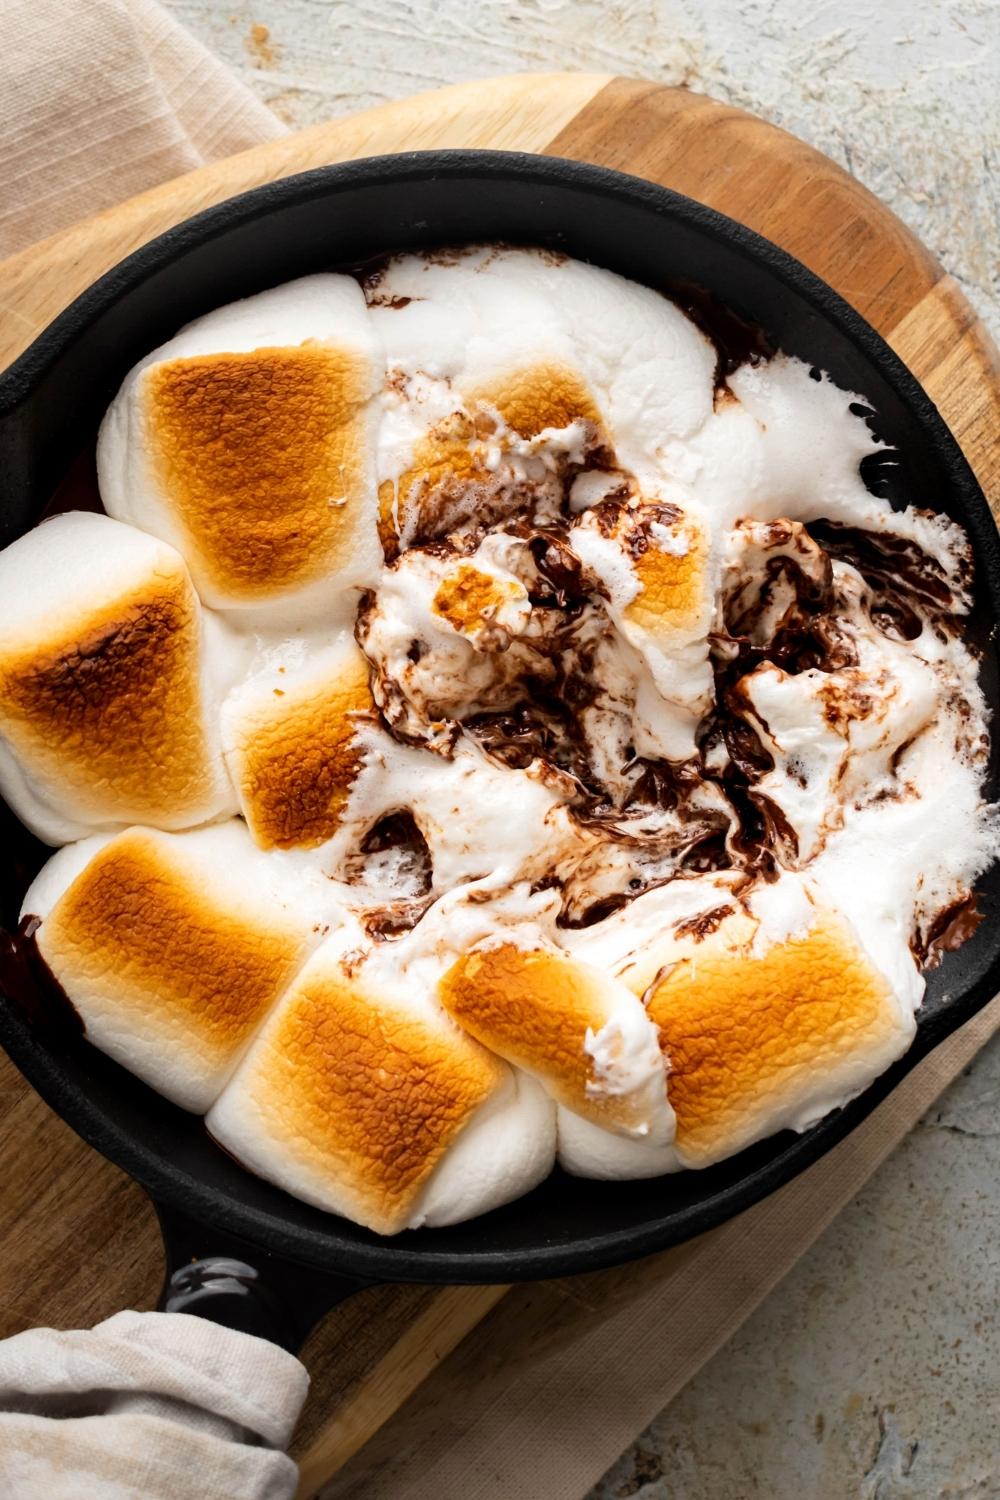 Golden marshmallows in a cast-iron skillet with some of them smashed and melted chocolate showing.